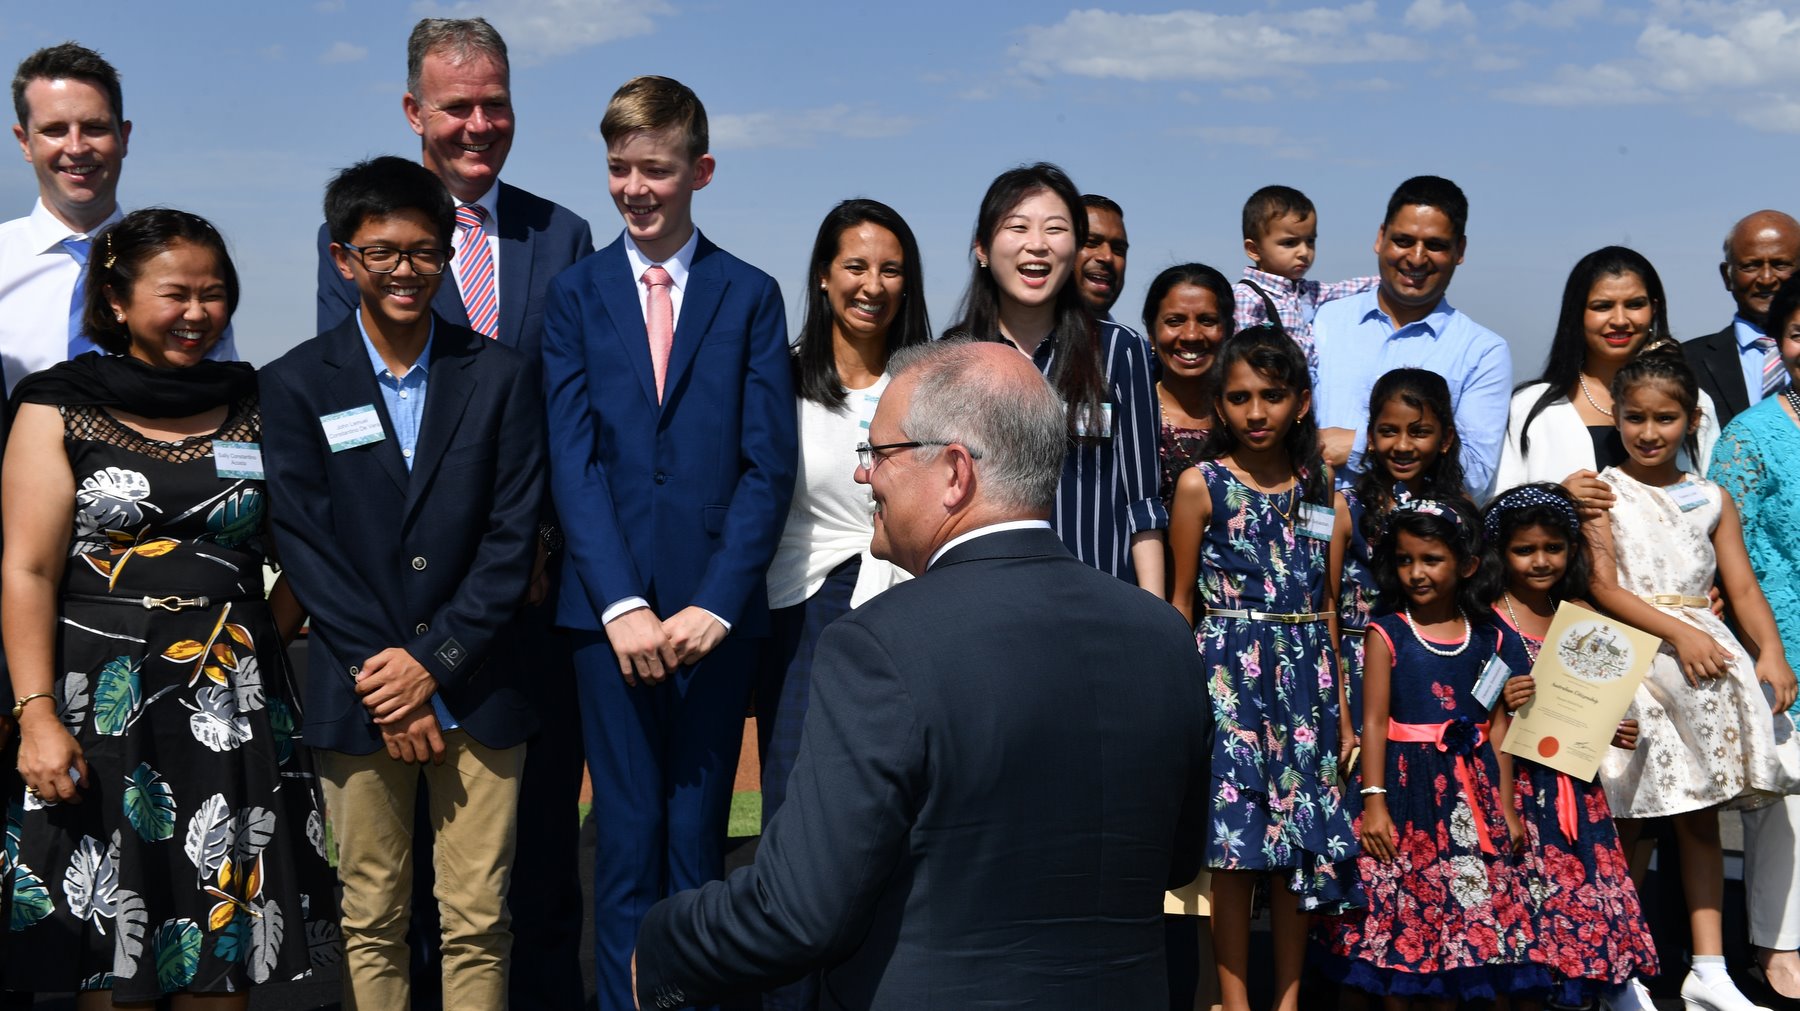 Prime Minister Scott Morrison with newly sworn citizens at an Australia Day Citizenship Ceremony and Flag Raising event in Canberra, Saturday, January 26, 2019. (AAP Image/Mick Tsikas) NO ARCHIVING